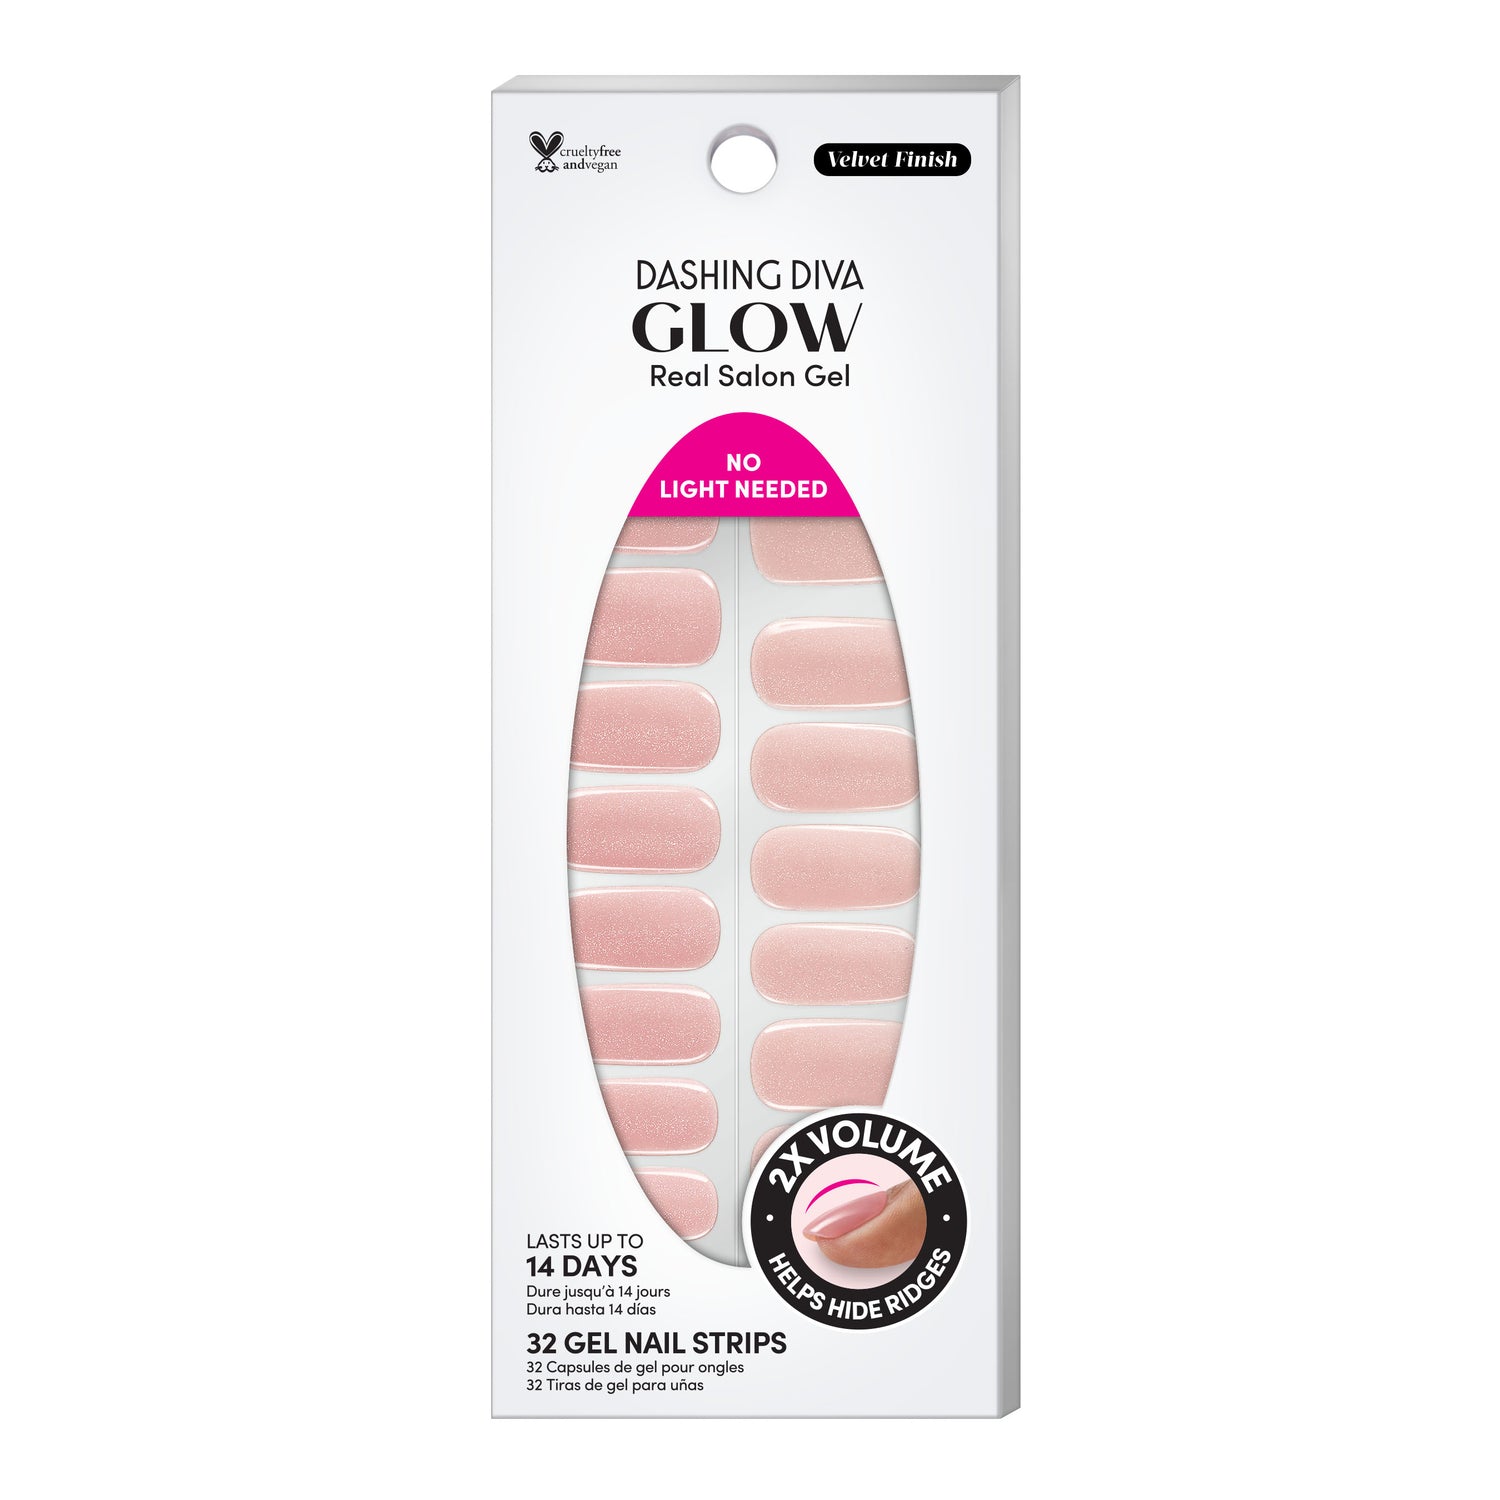  Nude pink gel nail strips featuring velvet shimmer with a double gel formula for an ultra-smooth finish.